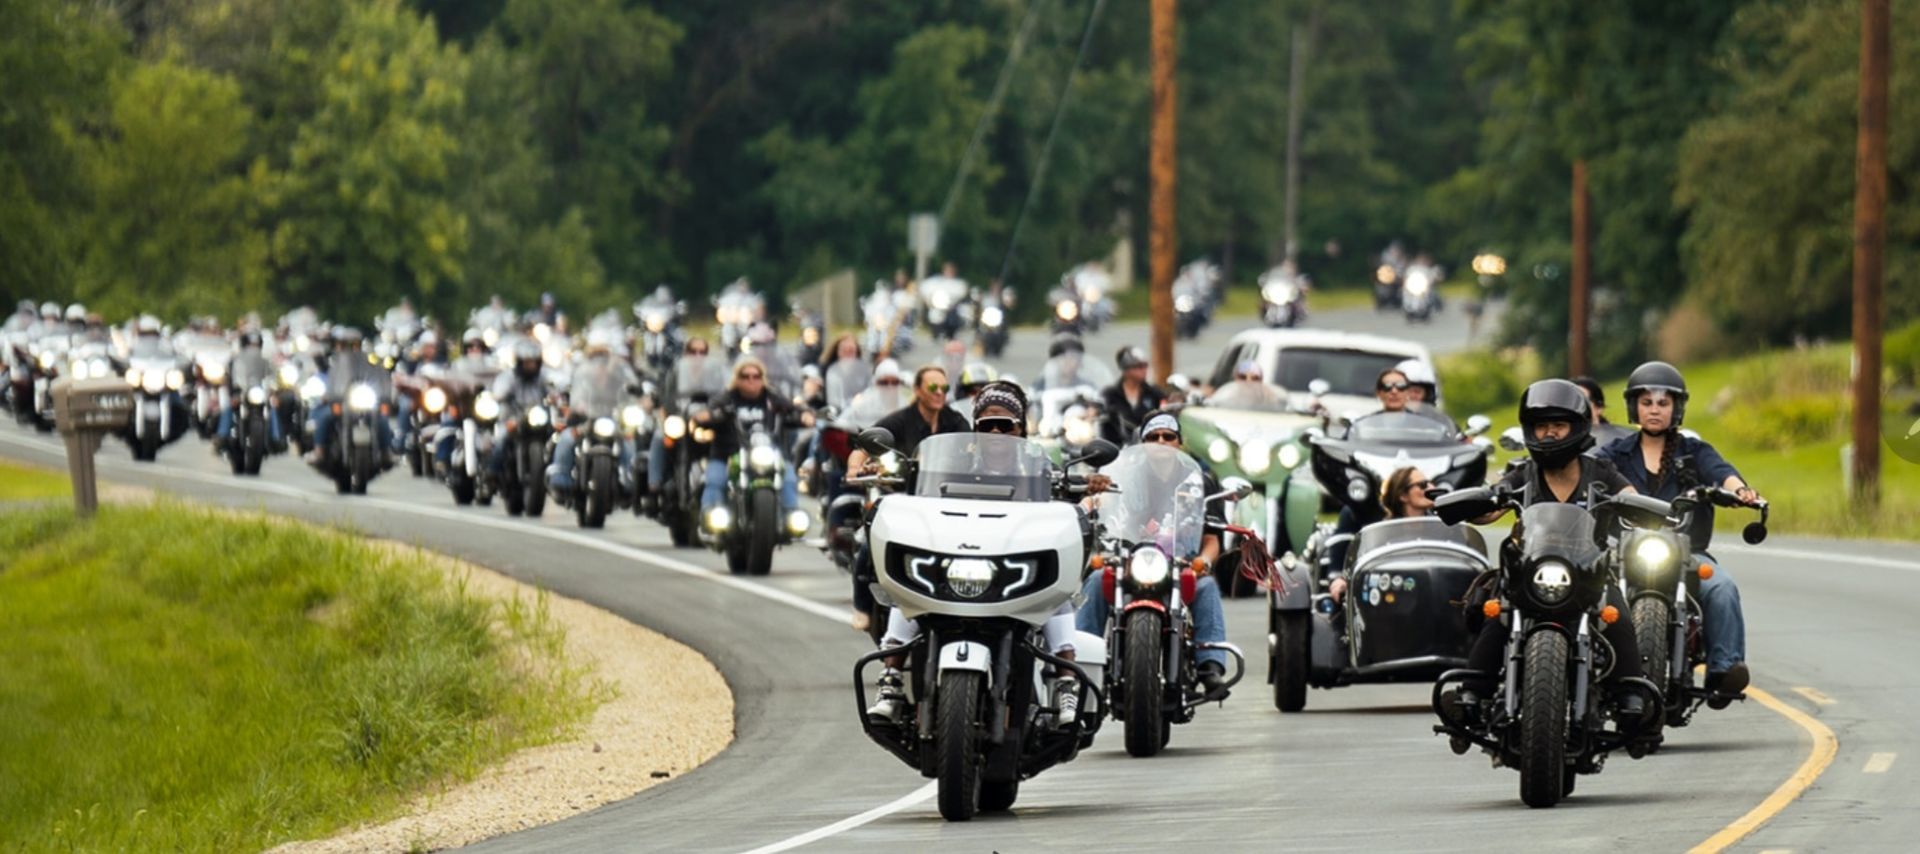 Longest Parade of Female Indian Motorcycle Riders: world record attempt in New Richmond, Wisconsin